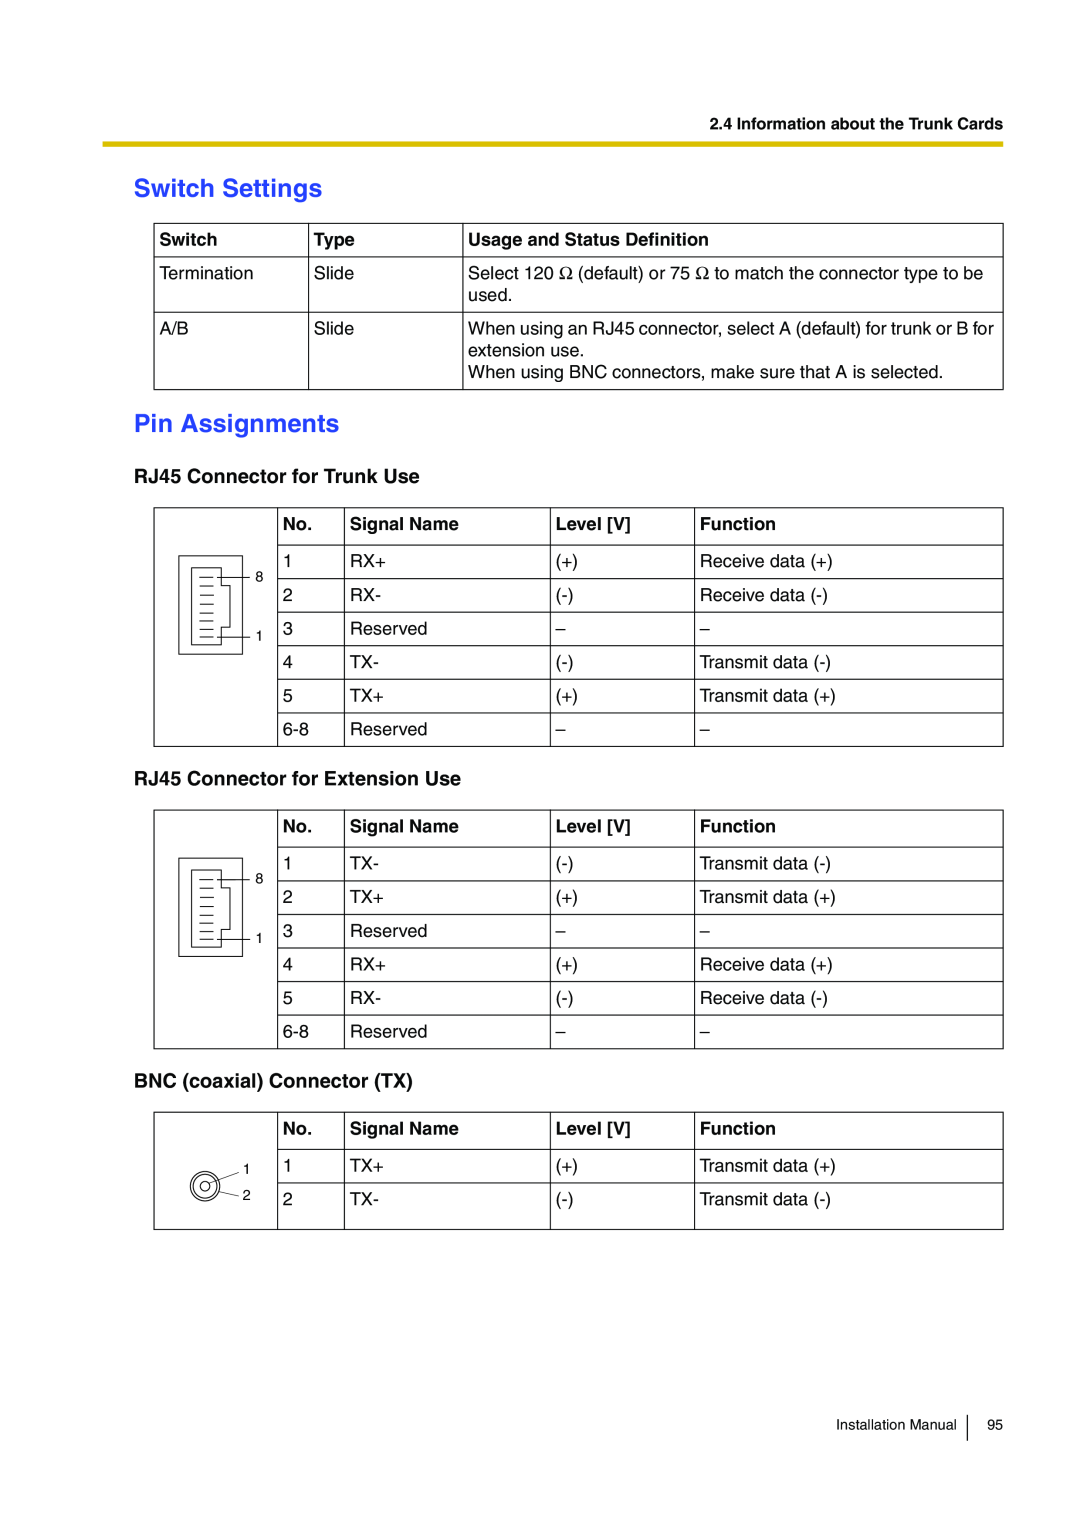 Panasonic KX-TDA100 Switch Settings, Pin Assignments, RJ45 Connector for Trunk Use, RJ45 Connector for Extension Use, Type 